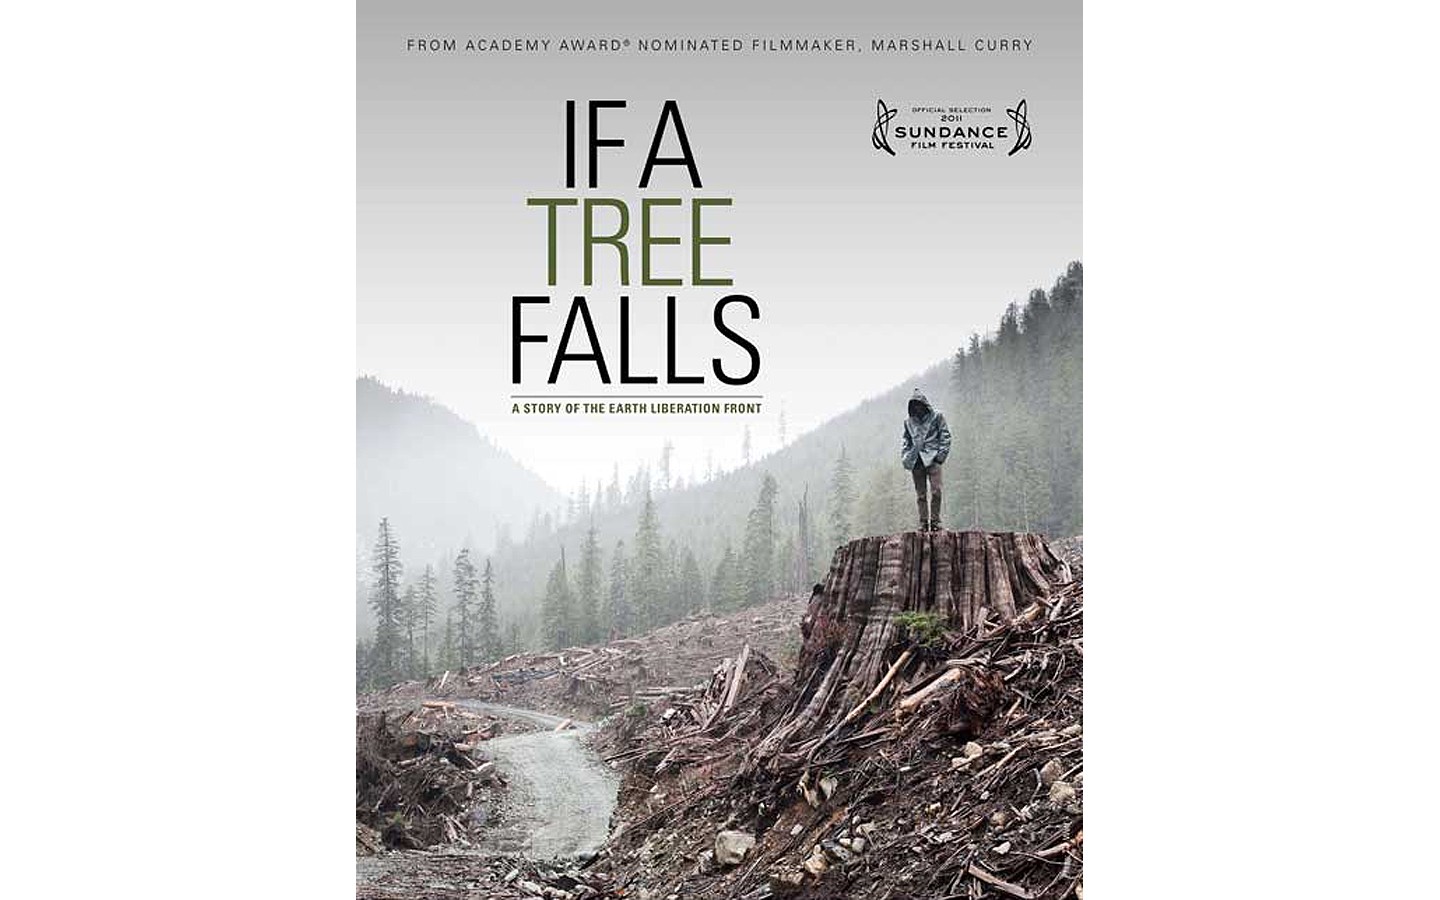 If A Tree Falls: A Story of Earth Liberation Front - PRODUCED AND DIRECTED BY MARSHALL CURRY AND SAM CULLMAN